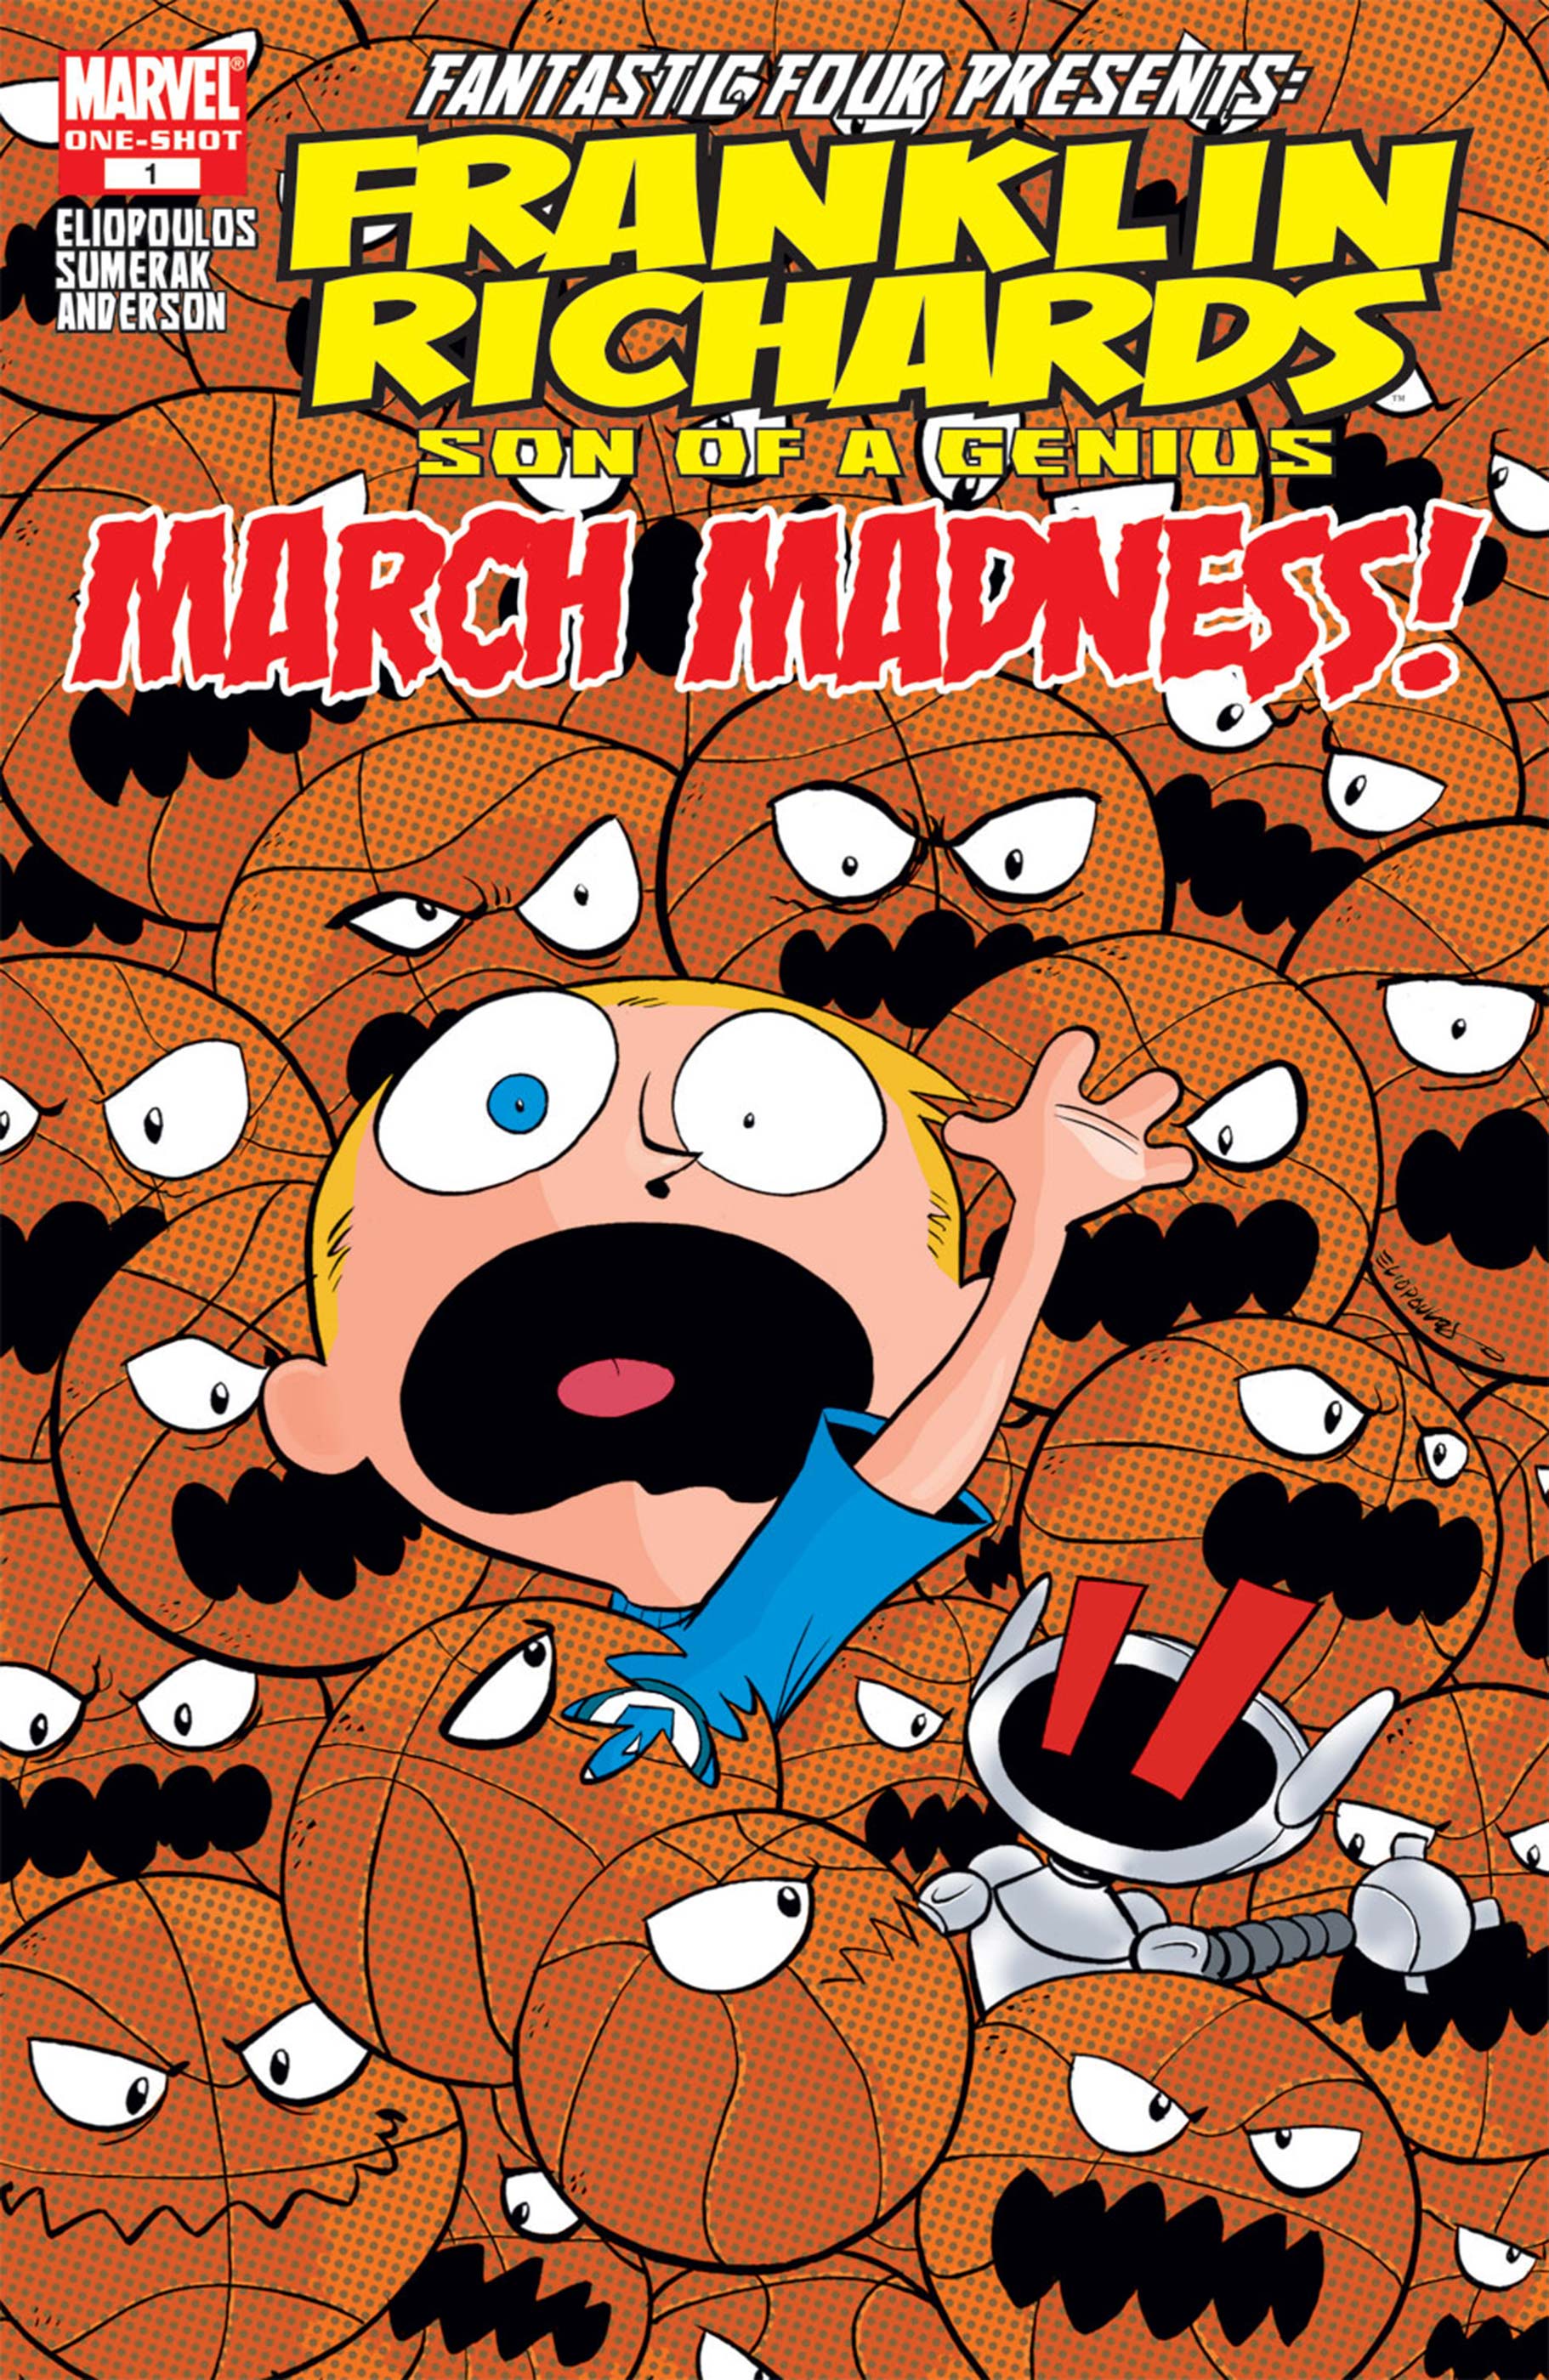 Franklin Richards: March Madness (2007) #1